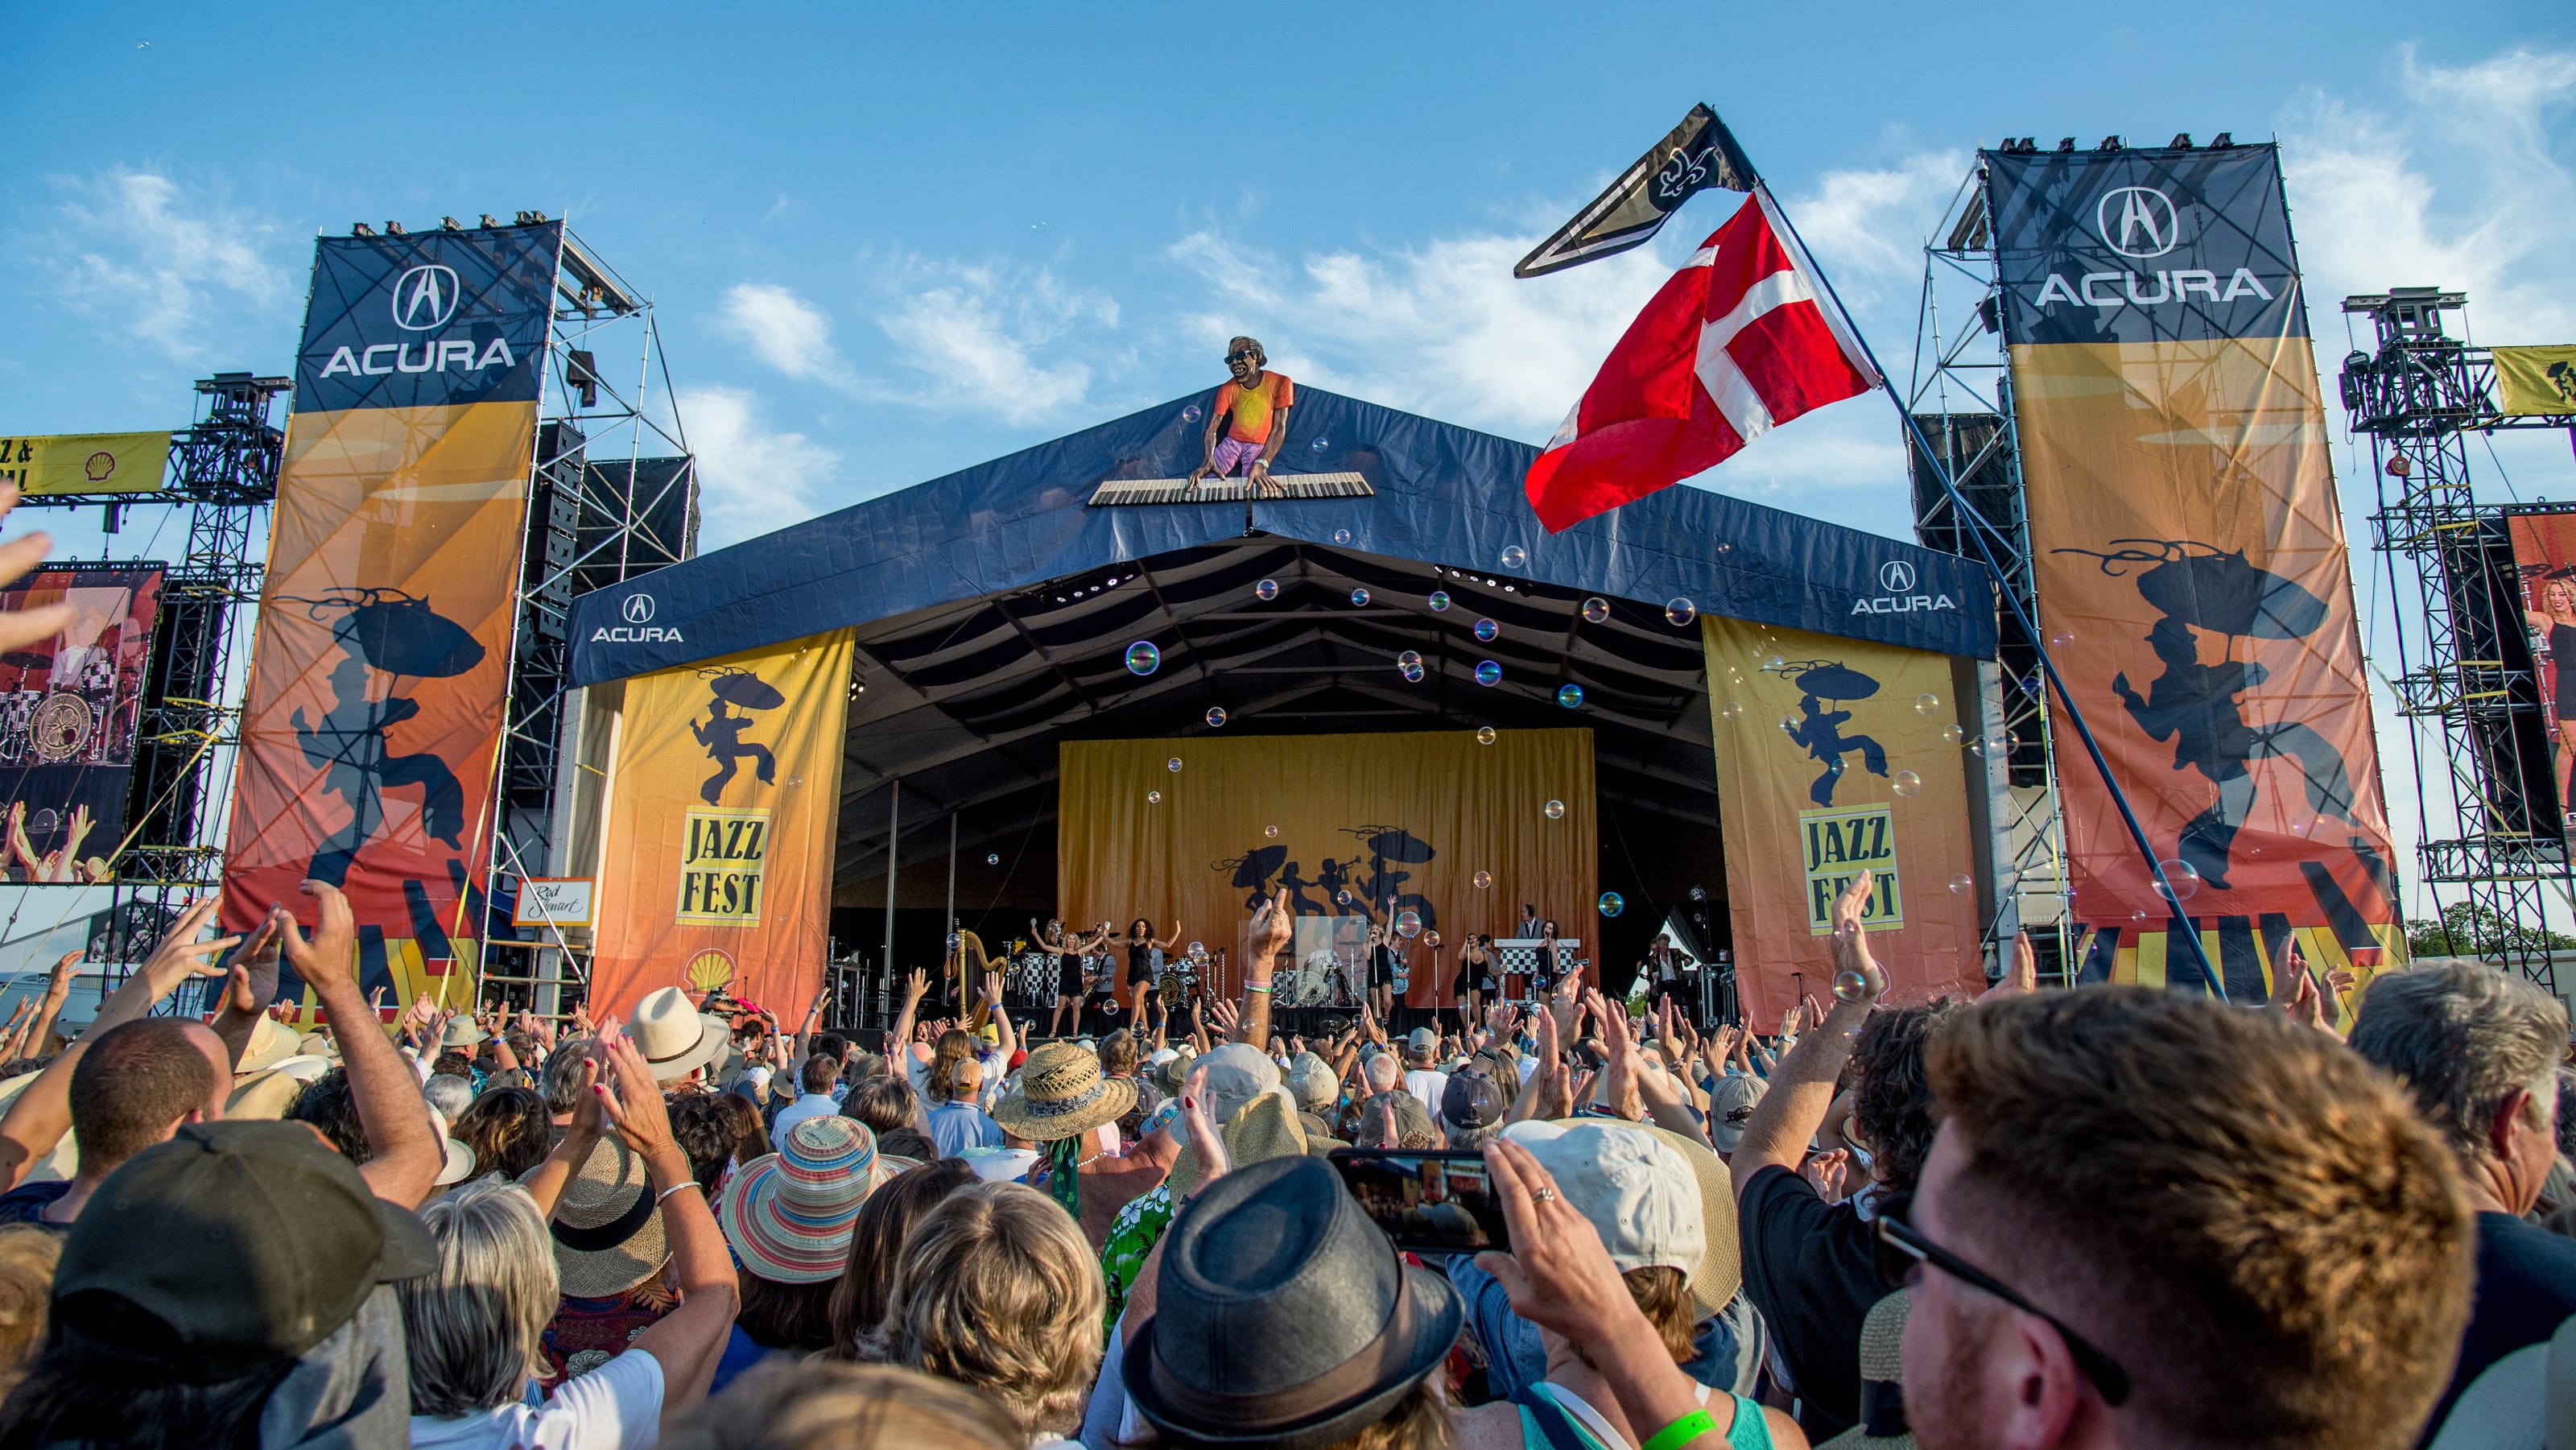 New Orleans Jazz Fest 2021 postponed to fall